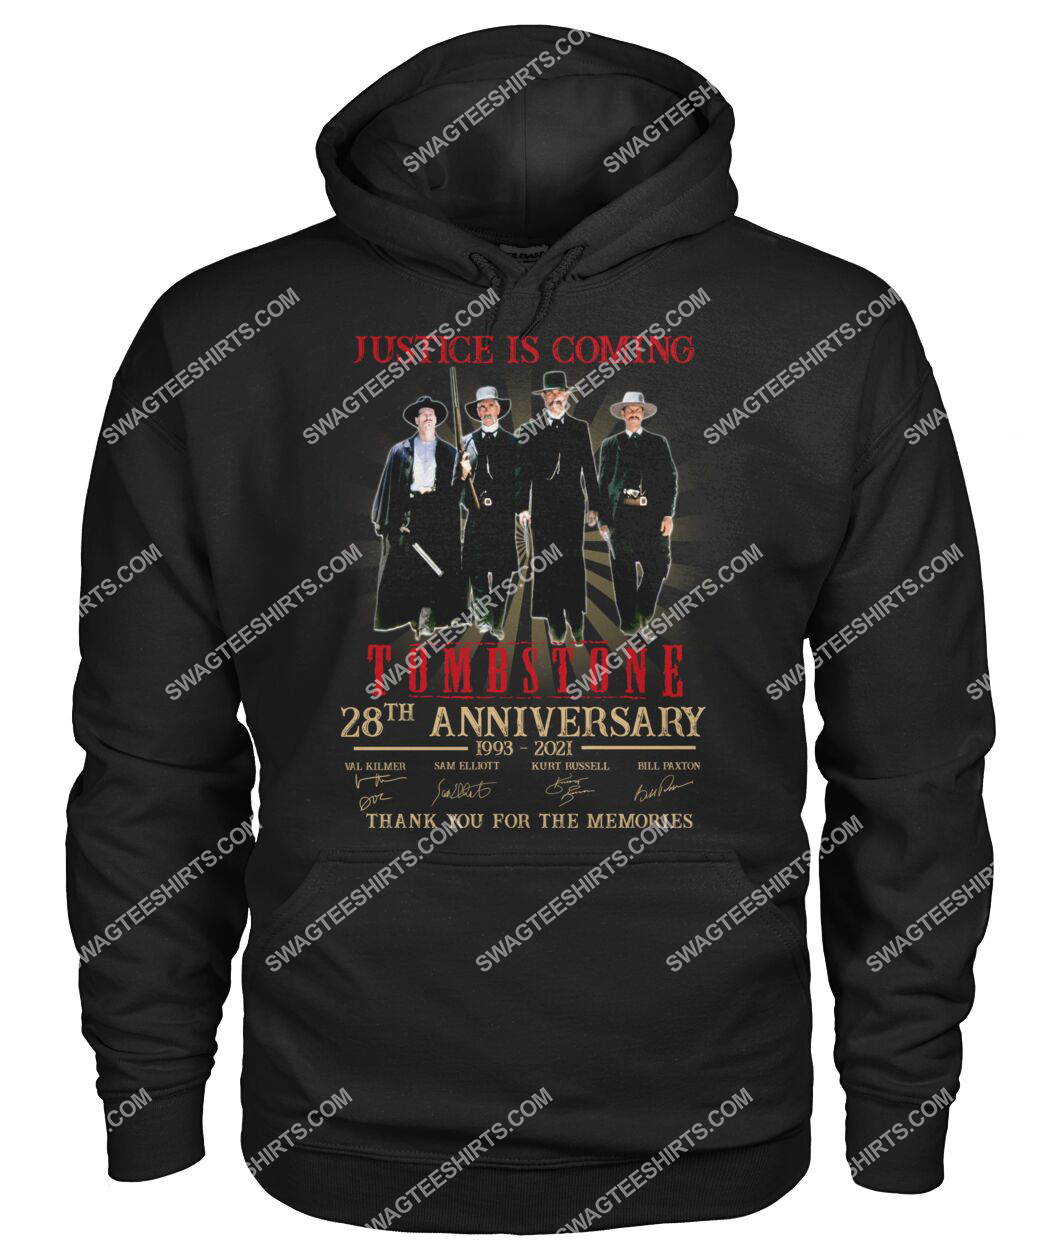 justice is coming tombstone 28th anniversary thank you for the memories hoodie 1